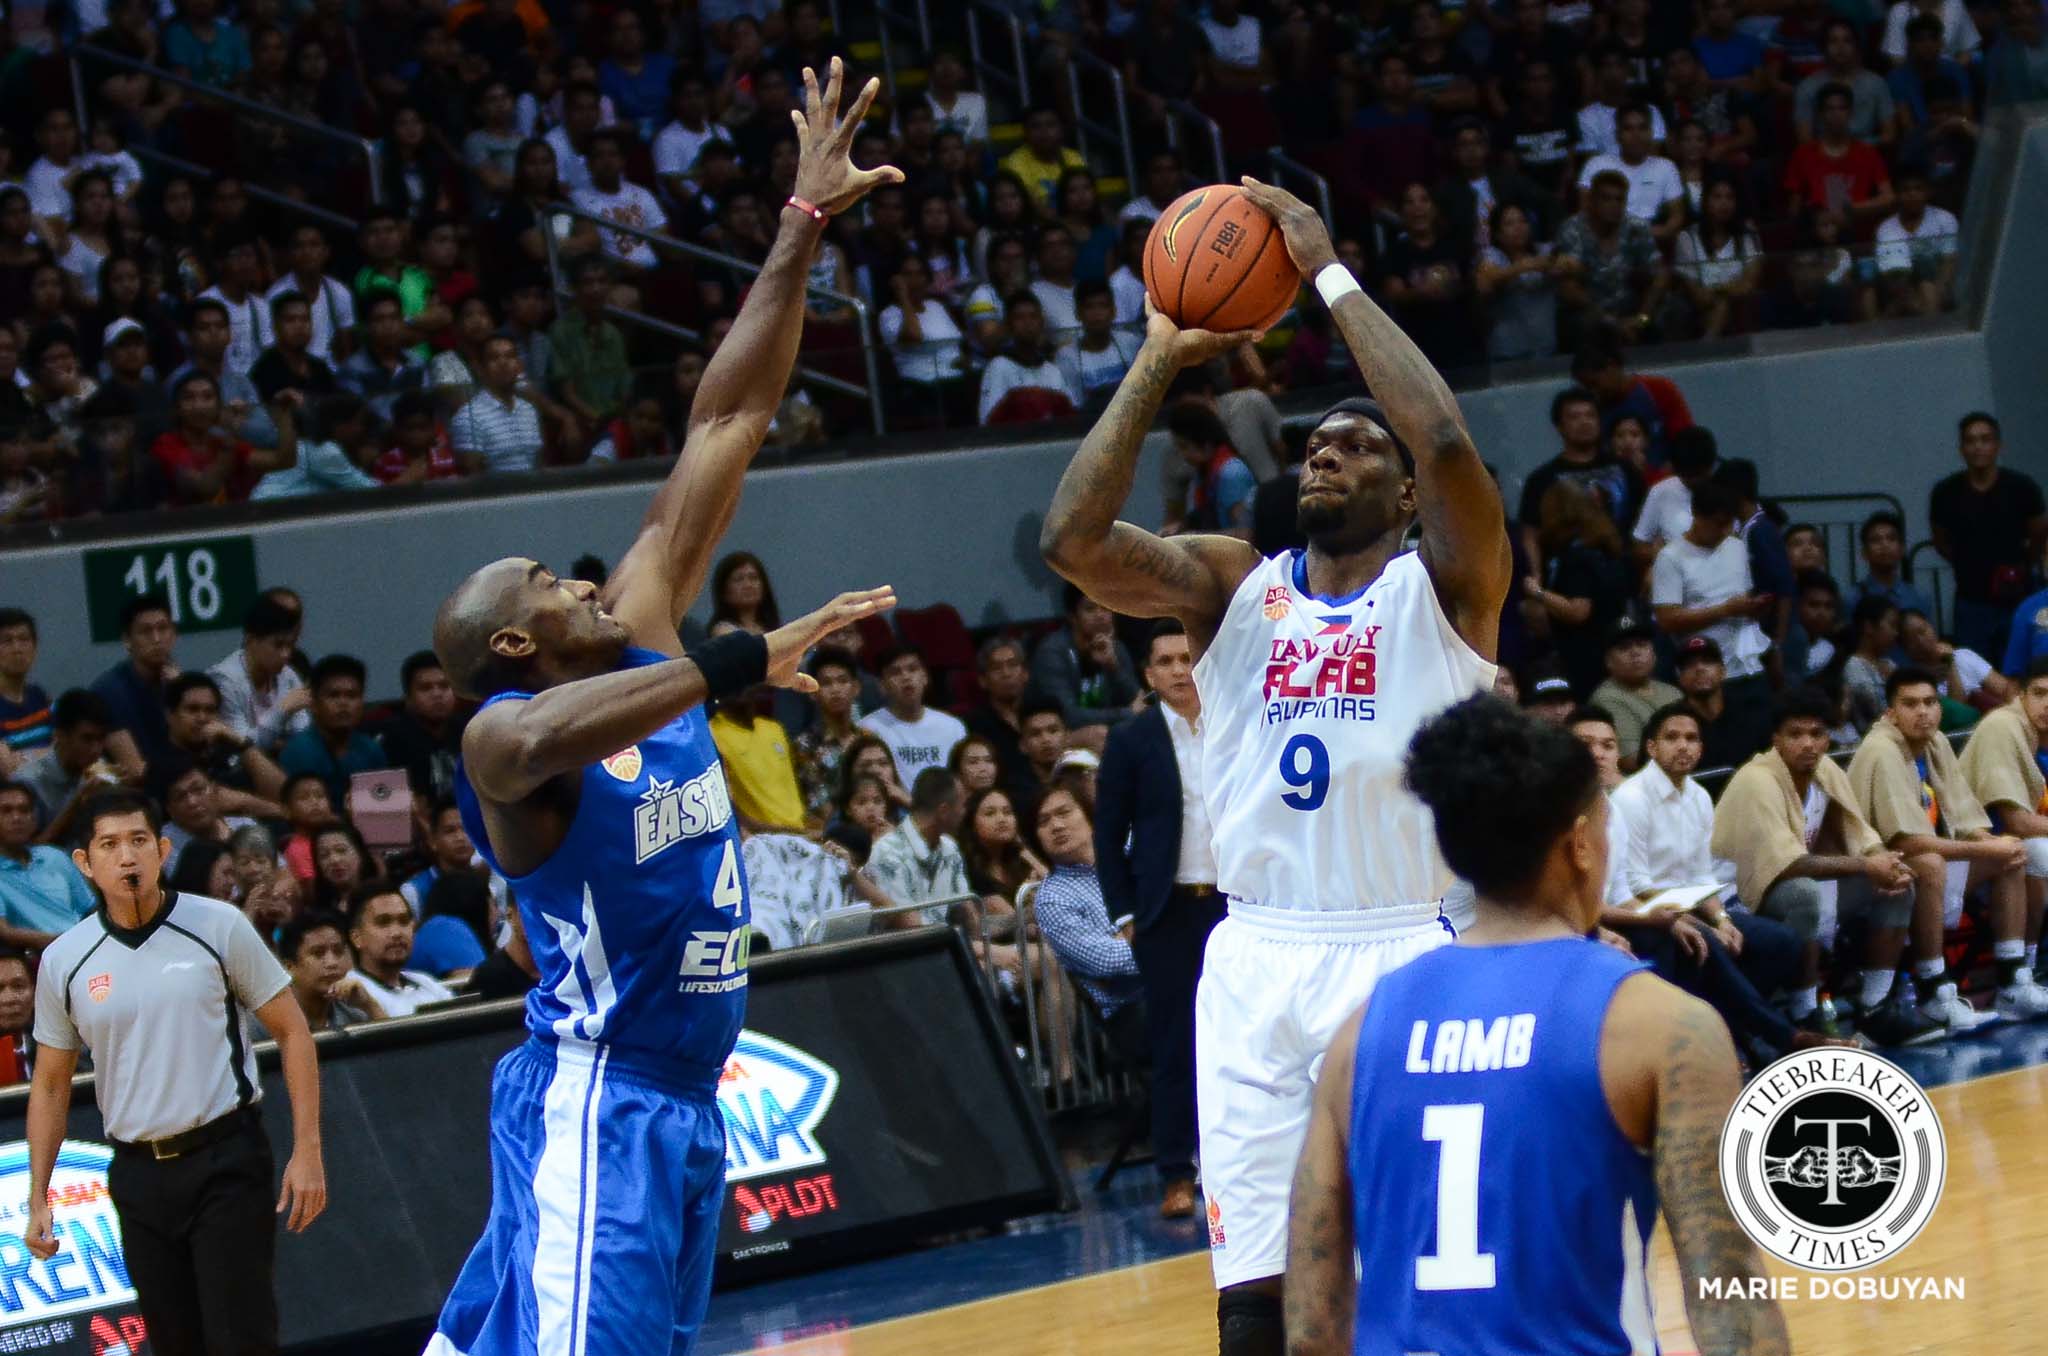 ABL-2017-Alab-Eastern-Okosa-5992 Reggie Okosa on being released by Alab: 'I feel like I did everything the right way' ABL Alab Pilipinas News  - philippine sports news